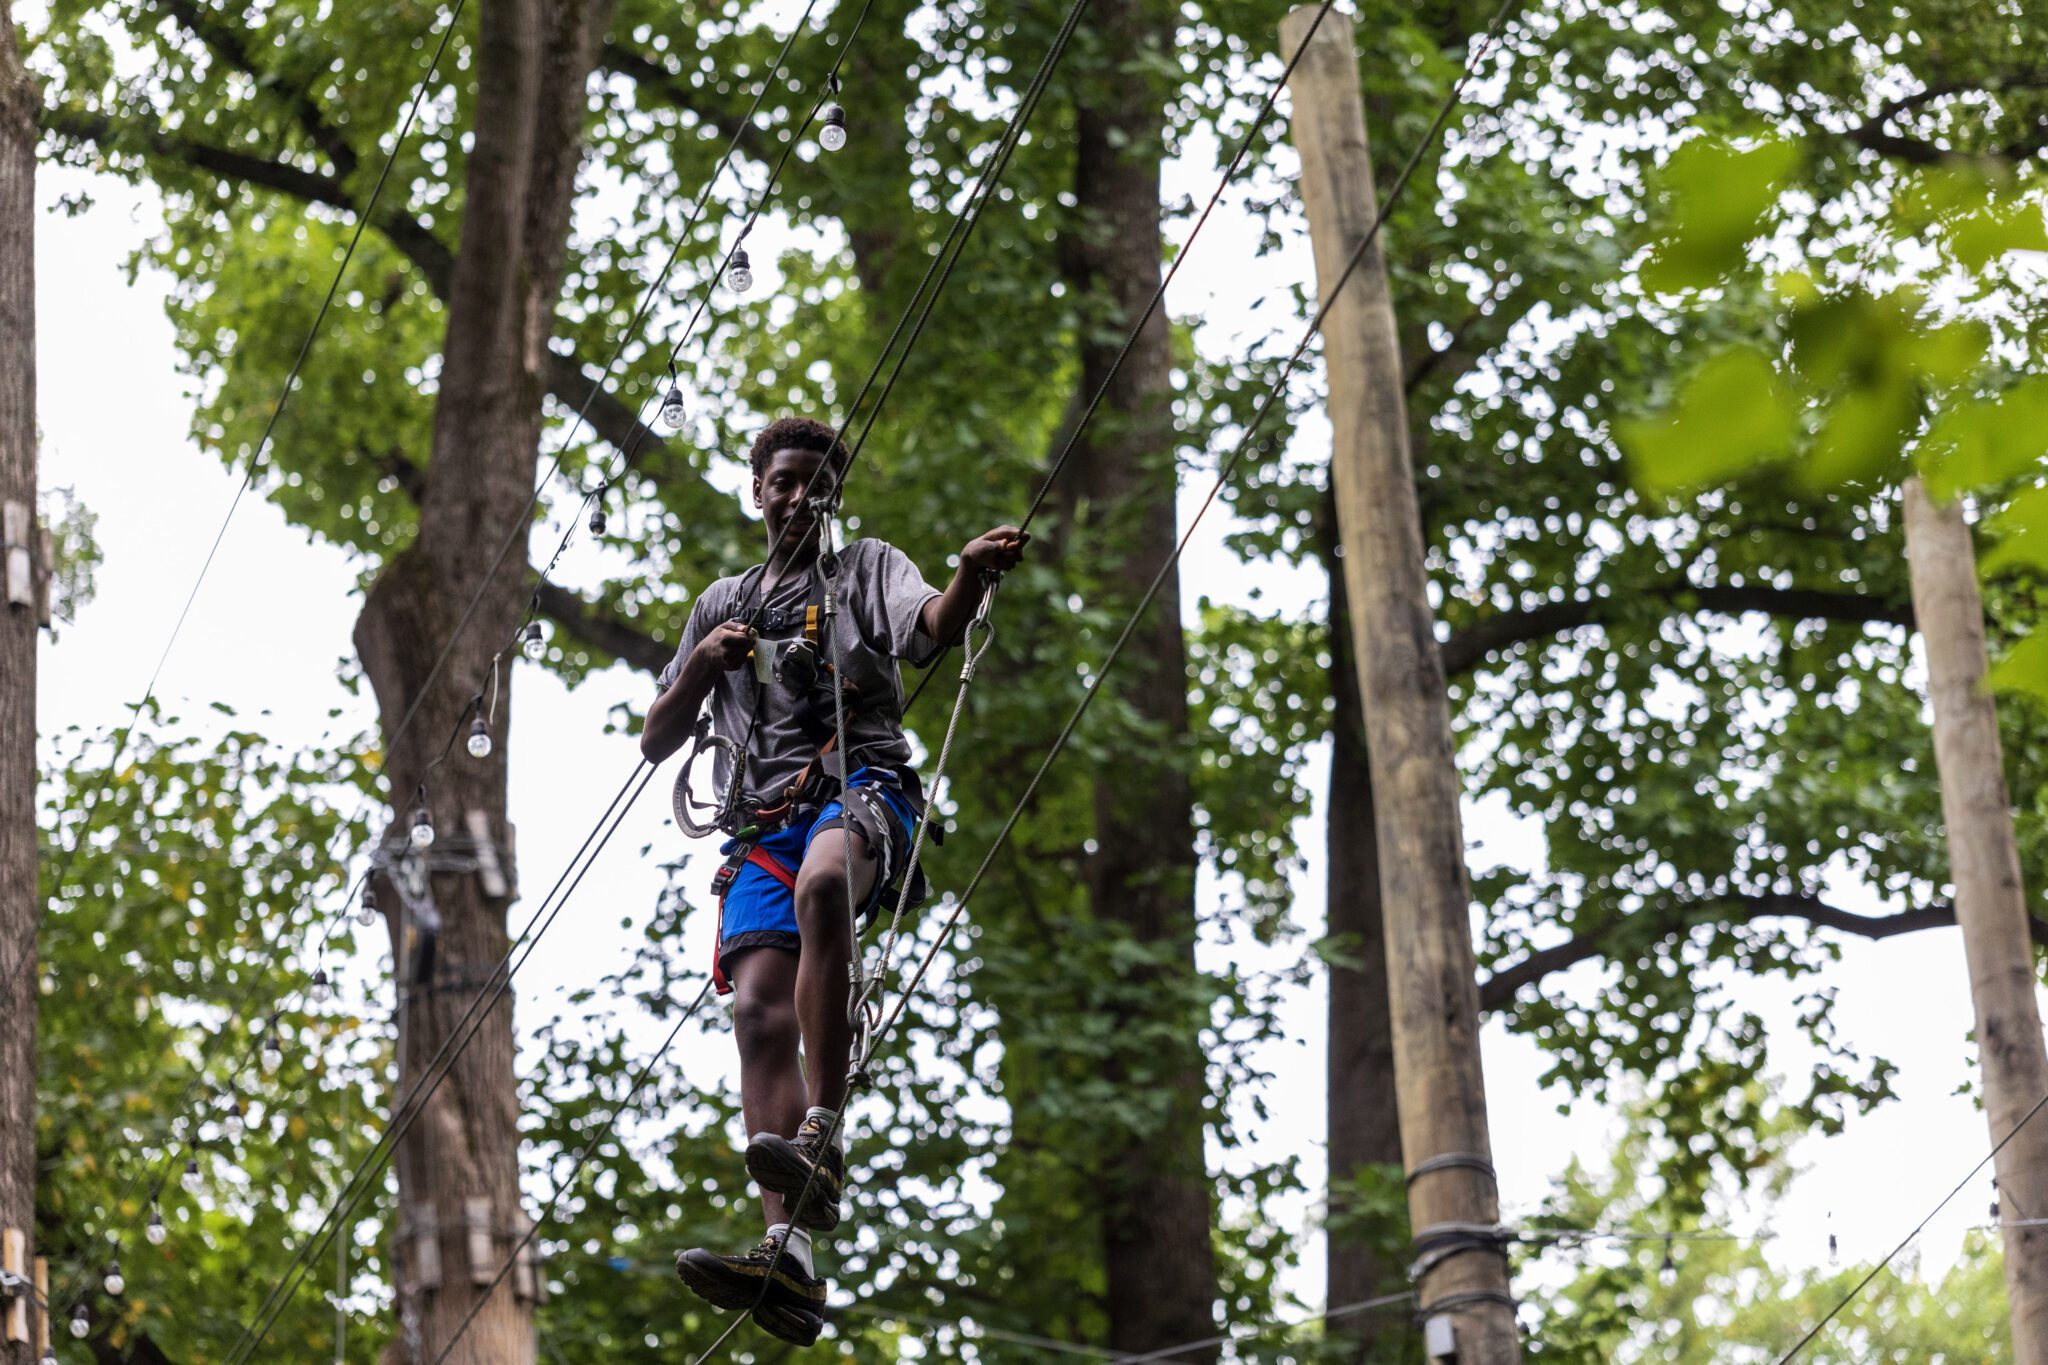 A man on a zip line in the woods, experiencing an adrenaline-fueled adventure as part of the P.L.E.D.G.E. Leadership Program.